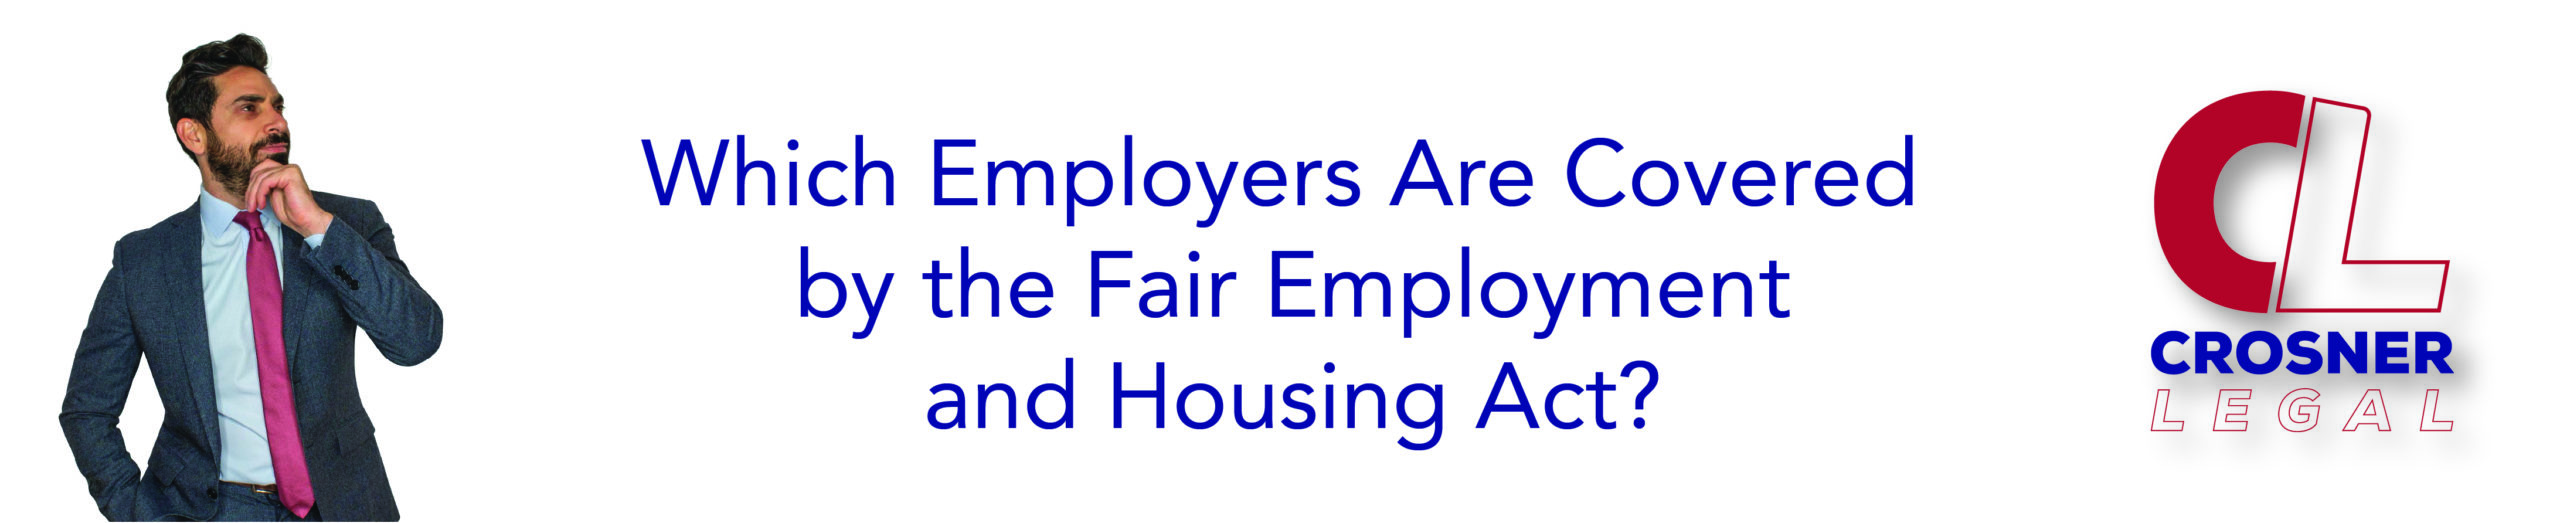 Which Employers Are Covered by the Fair Employment and Housing Act?